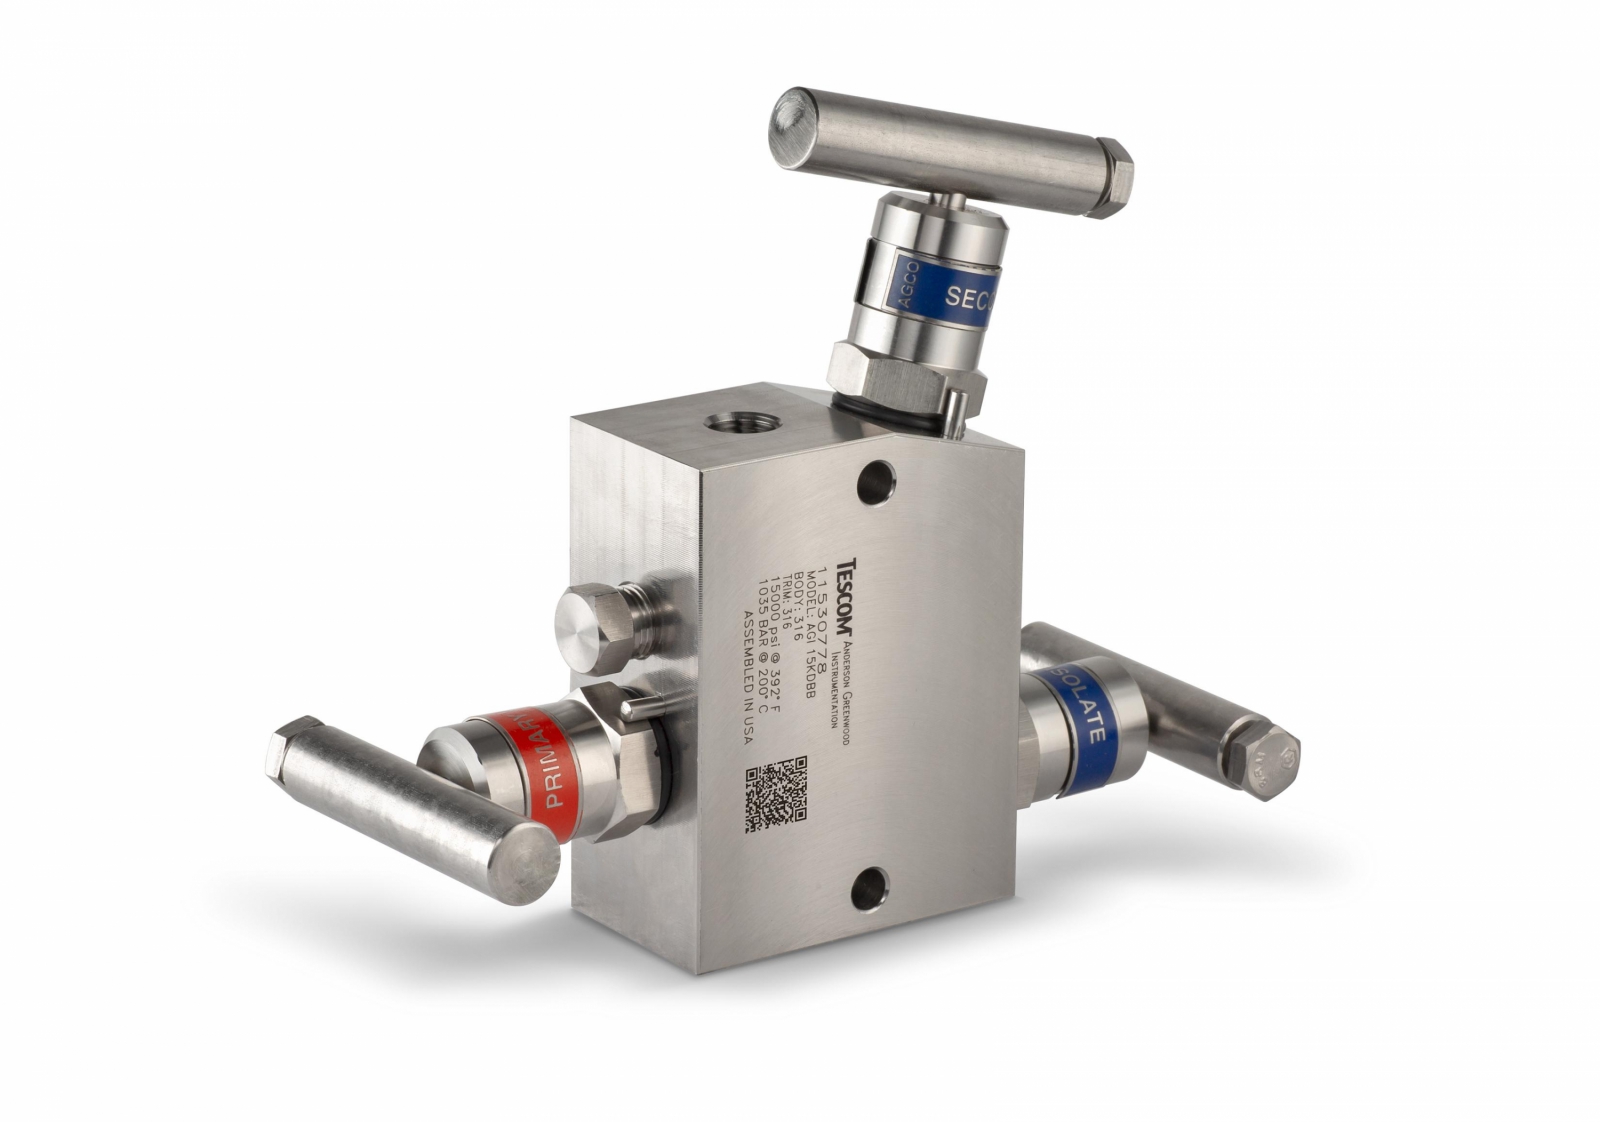 The Emerson H2 Valve Series 15,000 psi DBB and hand valves are hand-operated with a maintenance-free design, which minimizes downtime.